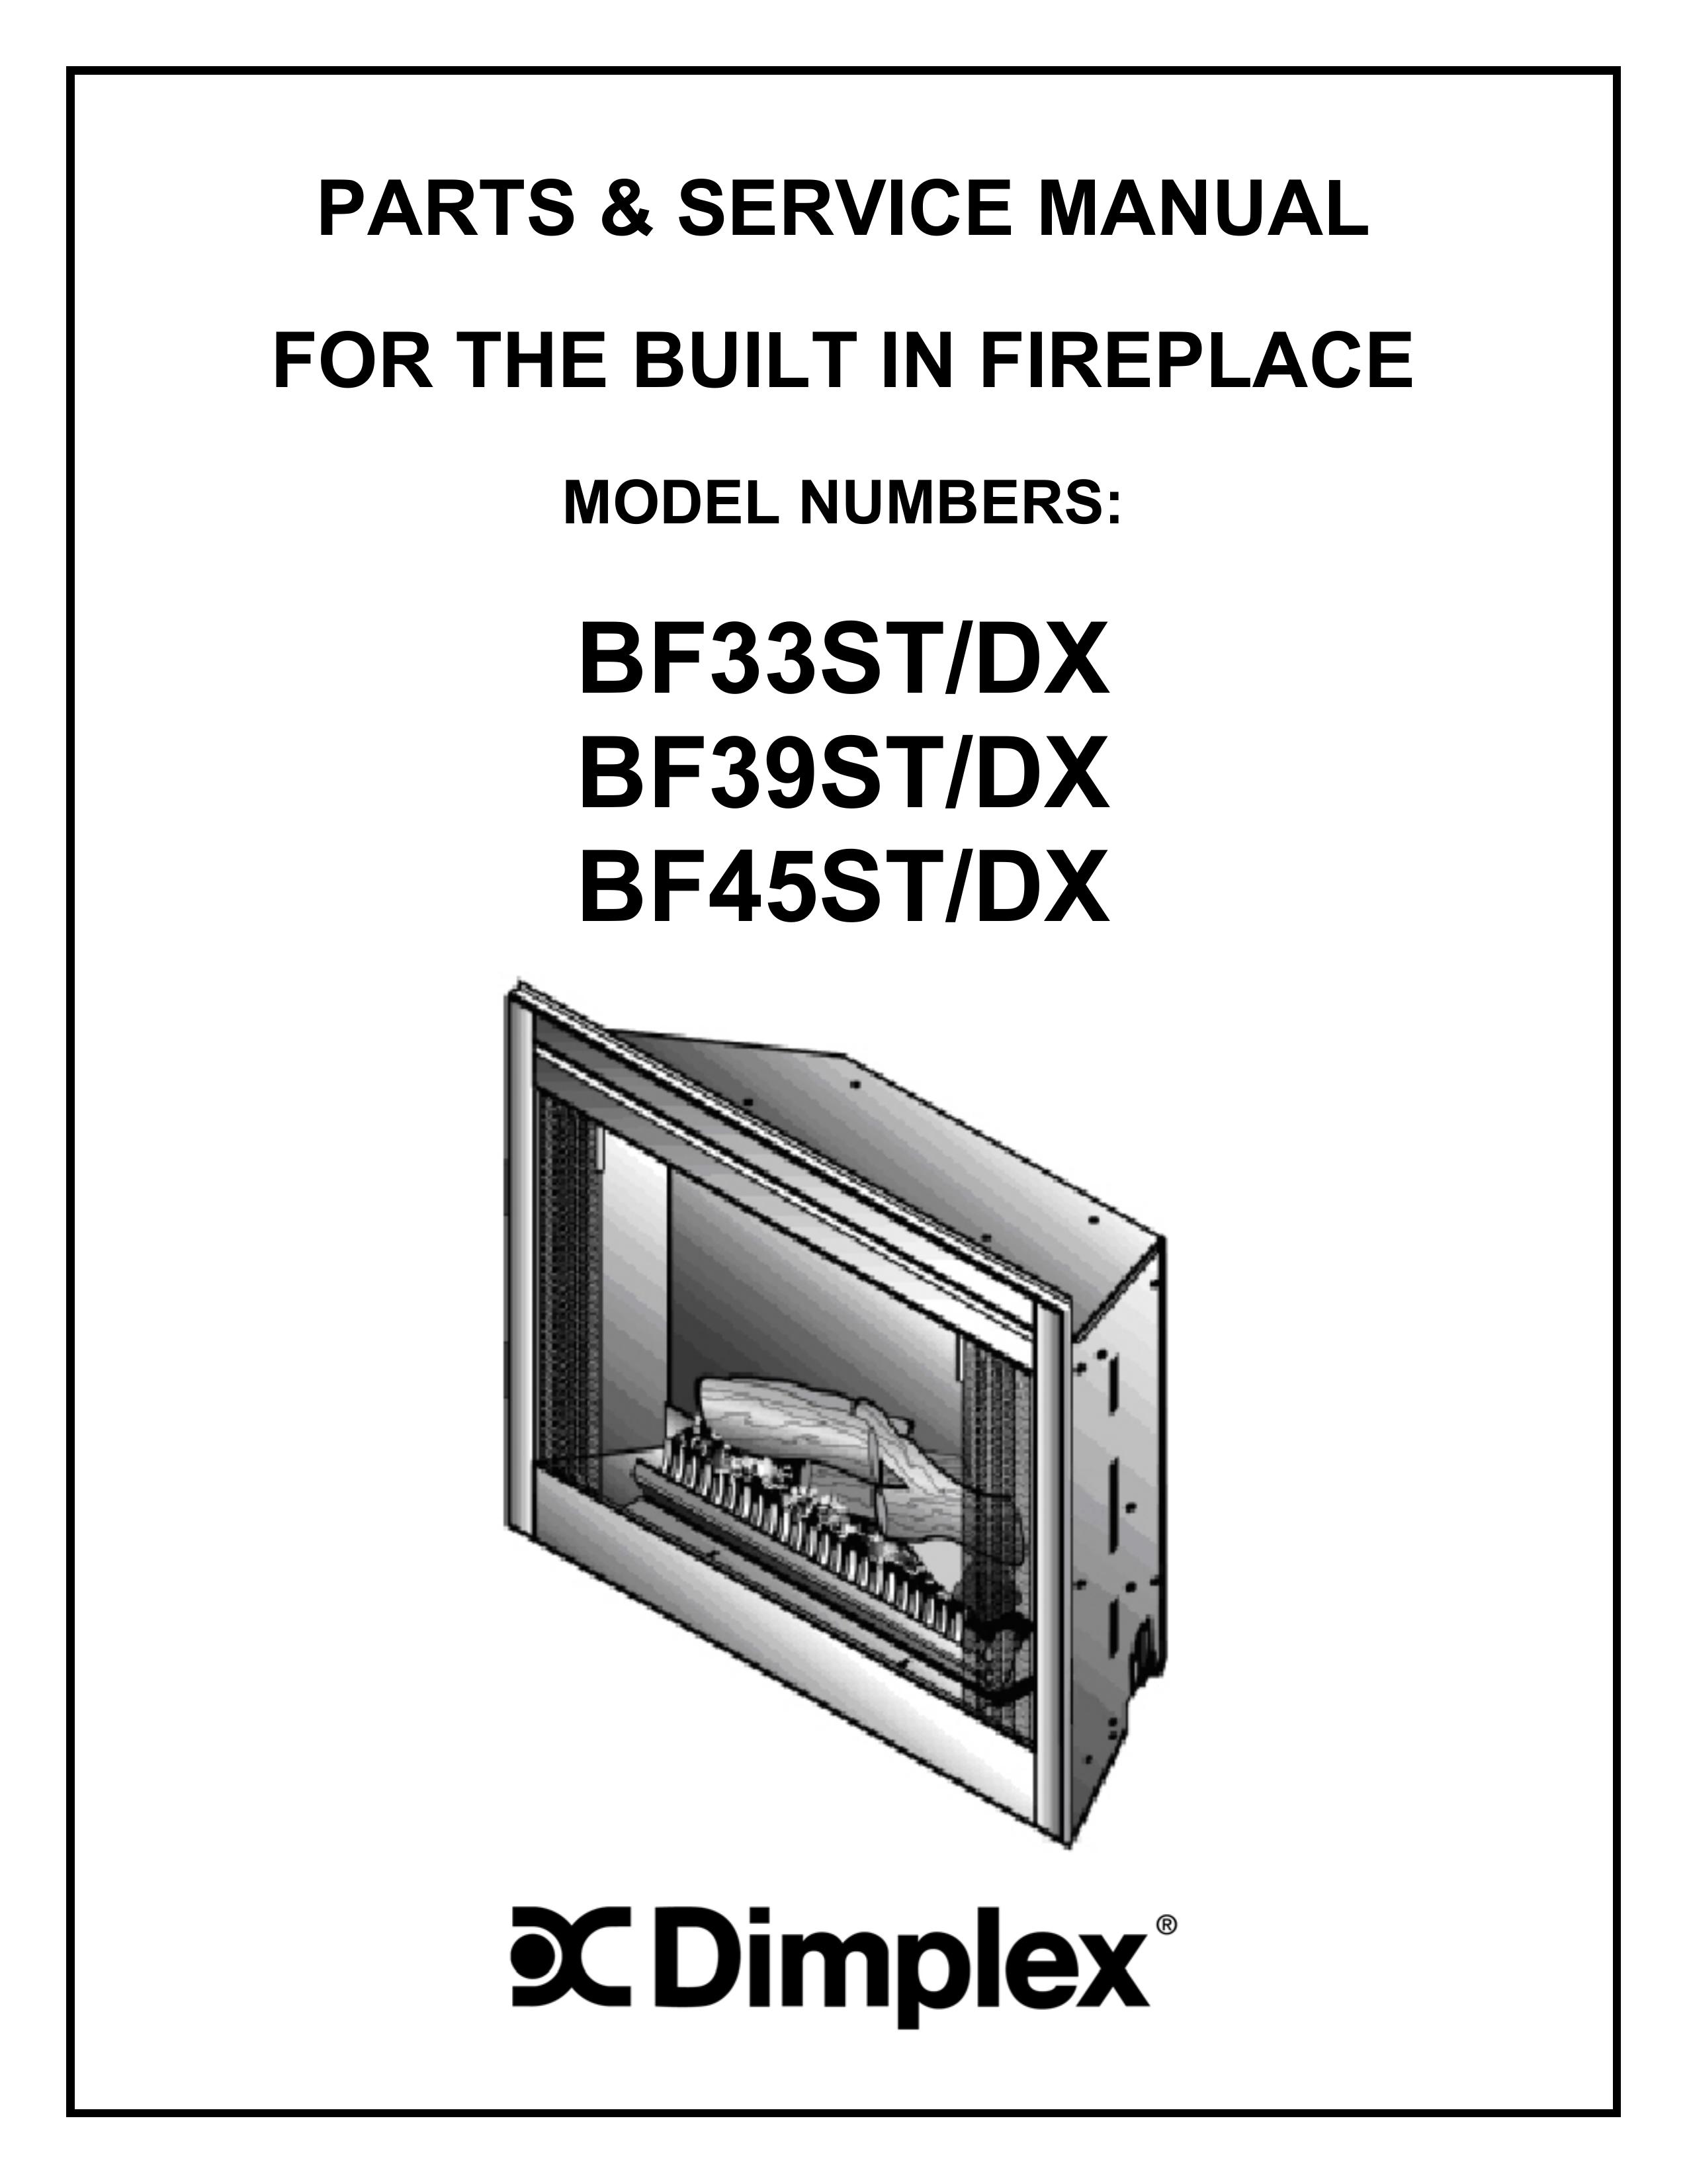 Dimplex BF33ST/DX Fire Pit User Manual